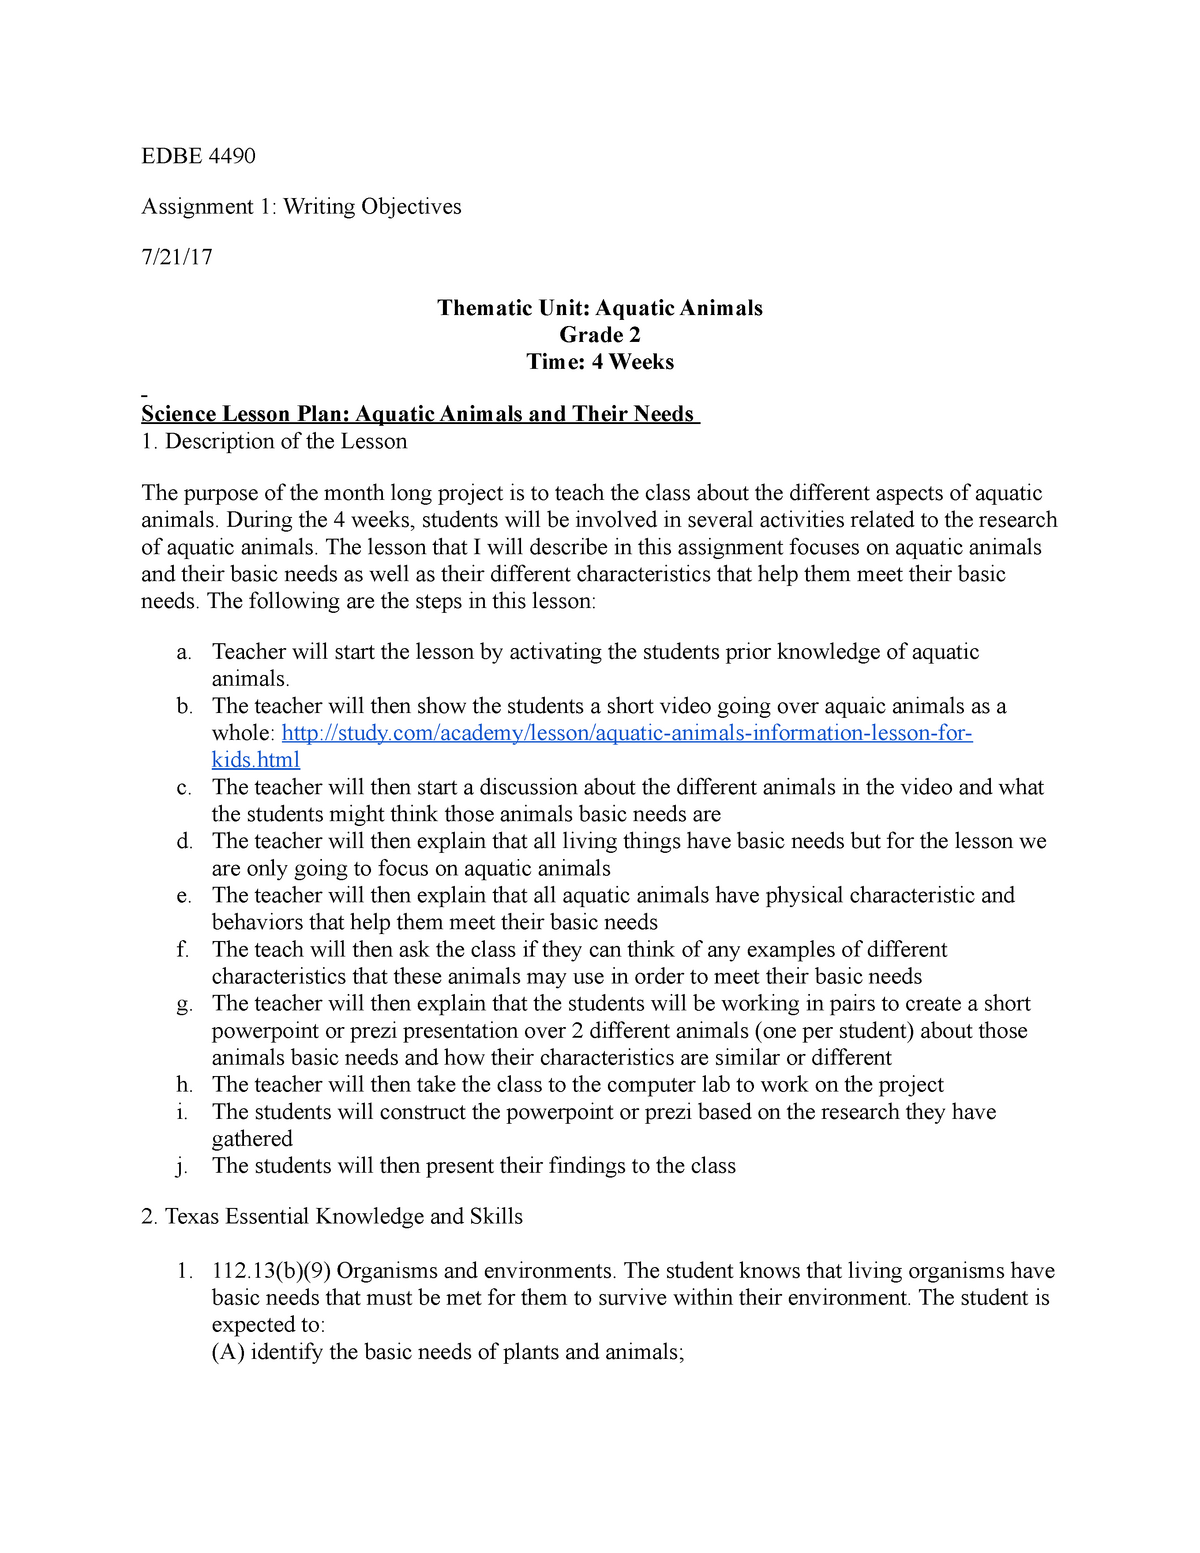 writing instructional objectives assignment quizlet